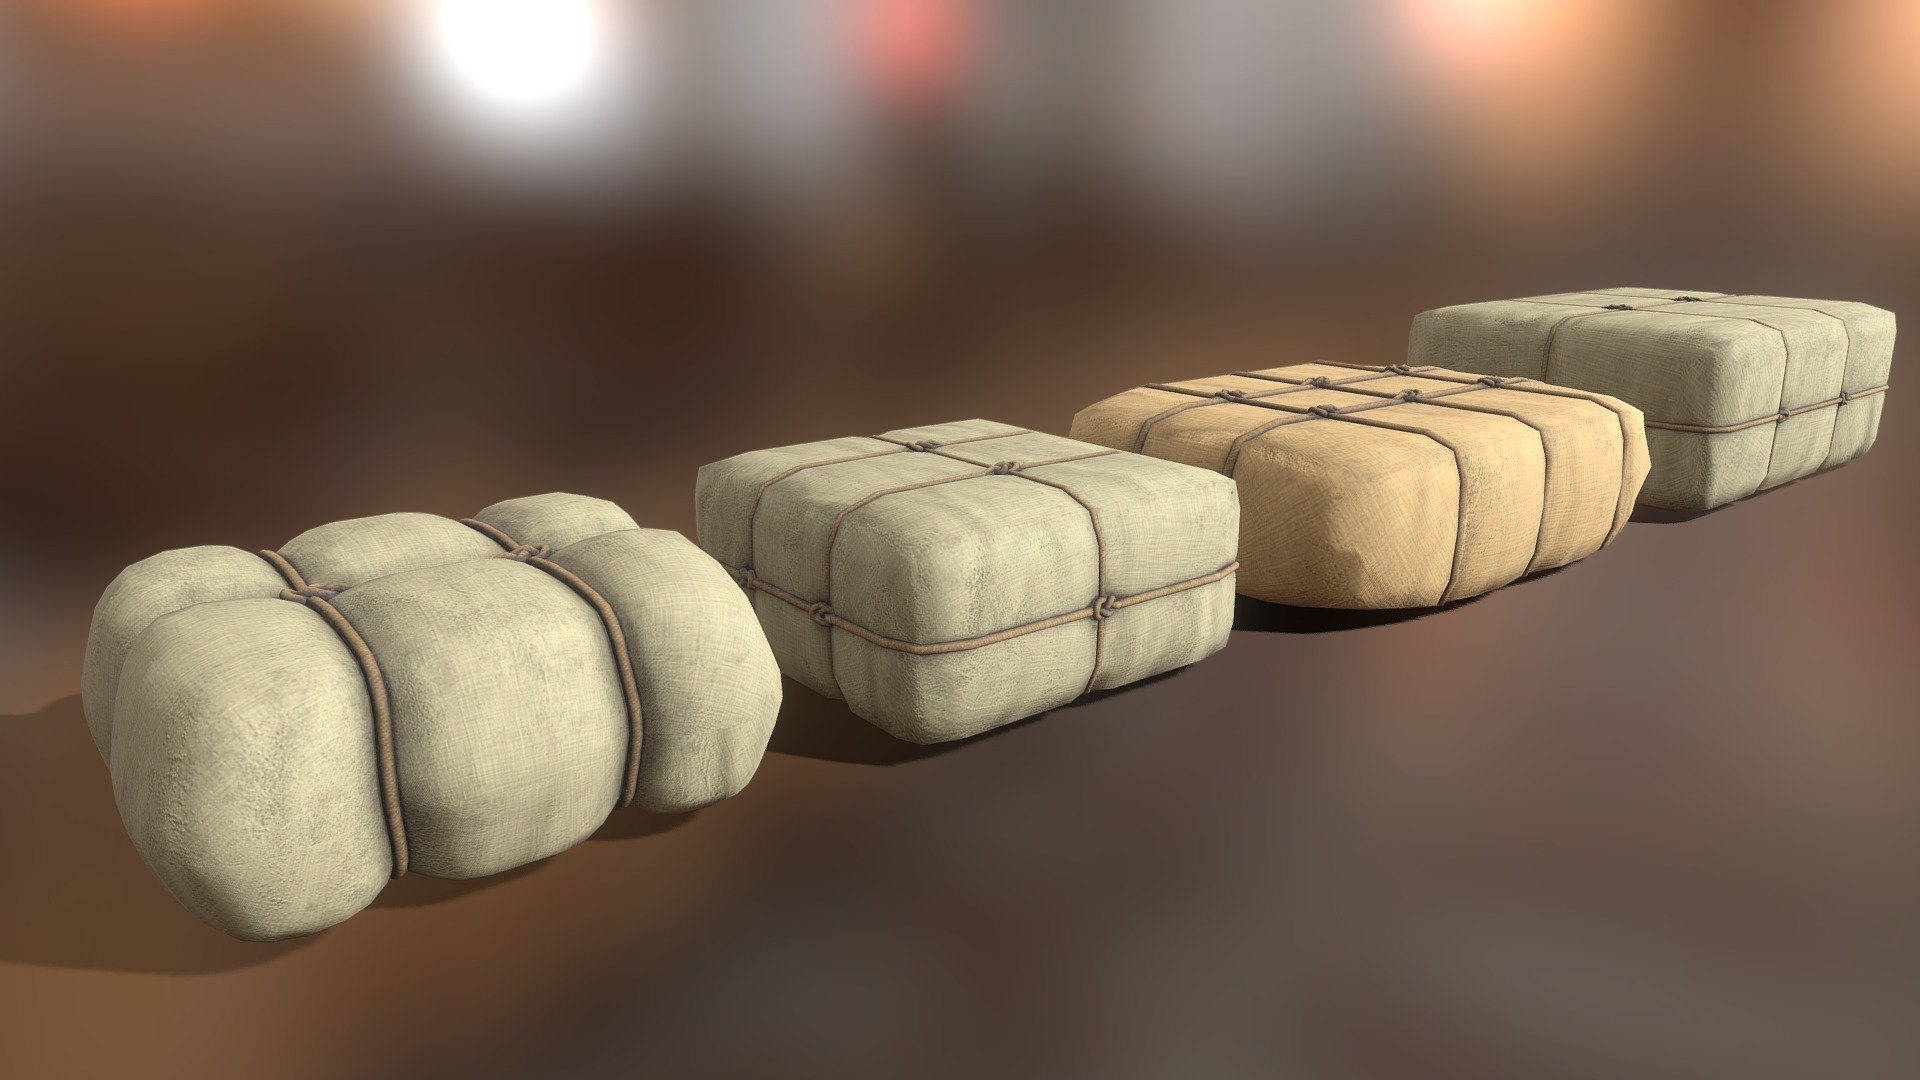 Cargo packages - 3D model by visualdimension 3d model